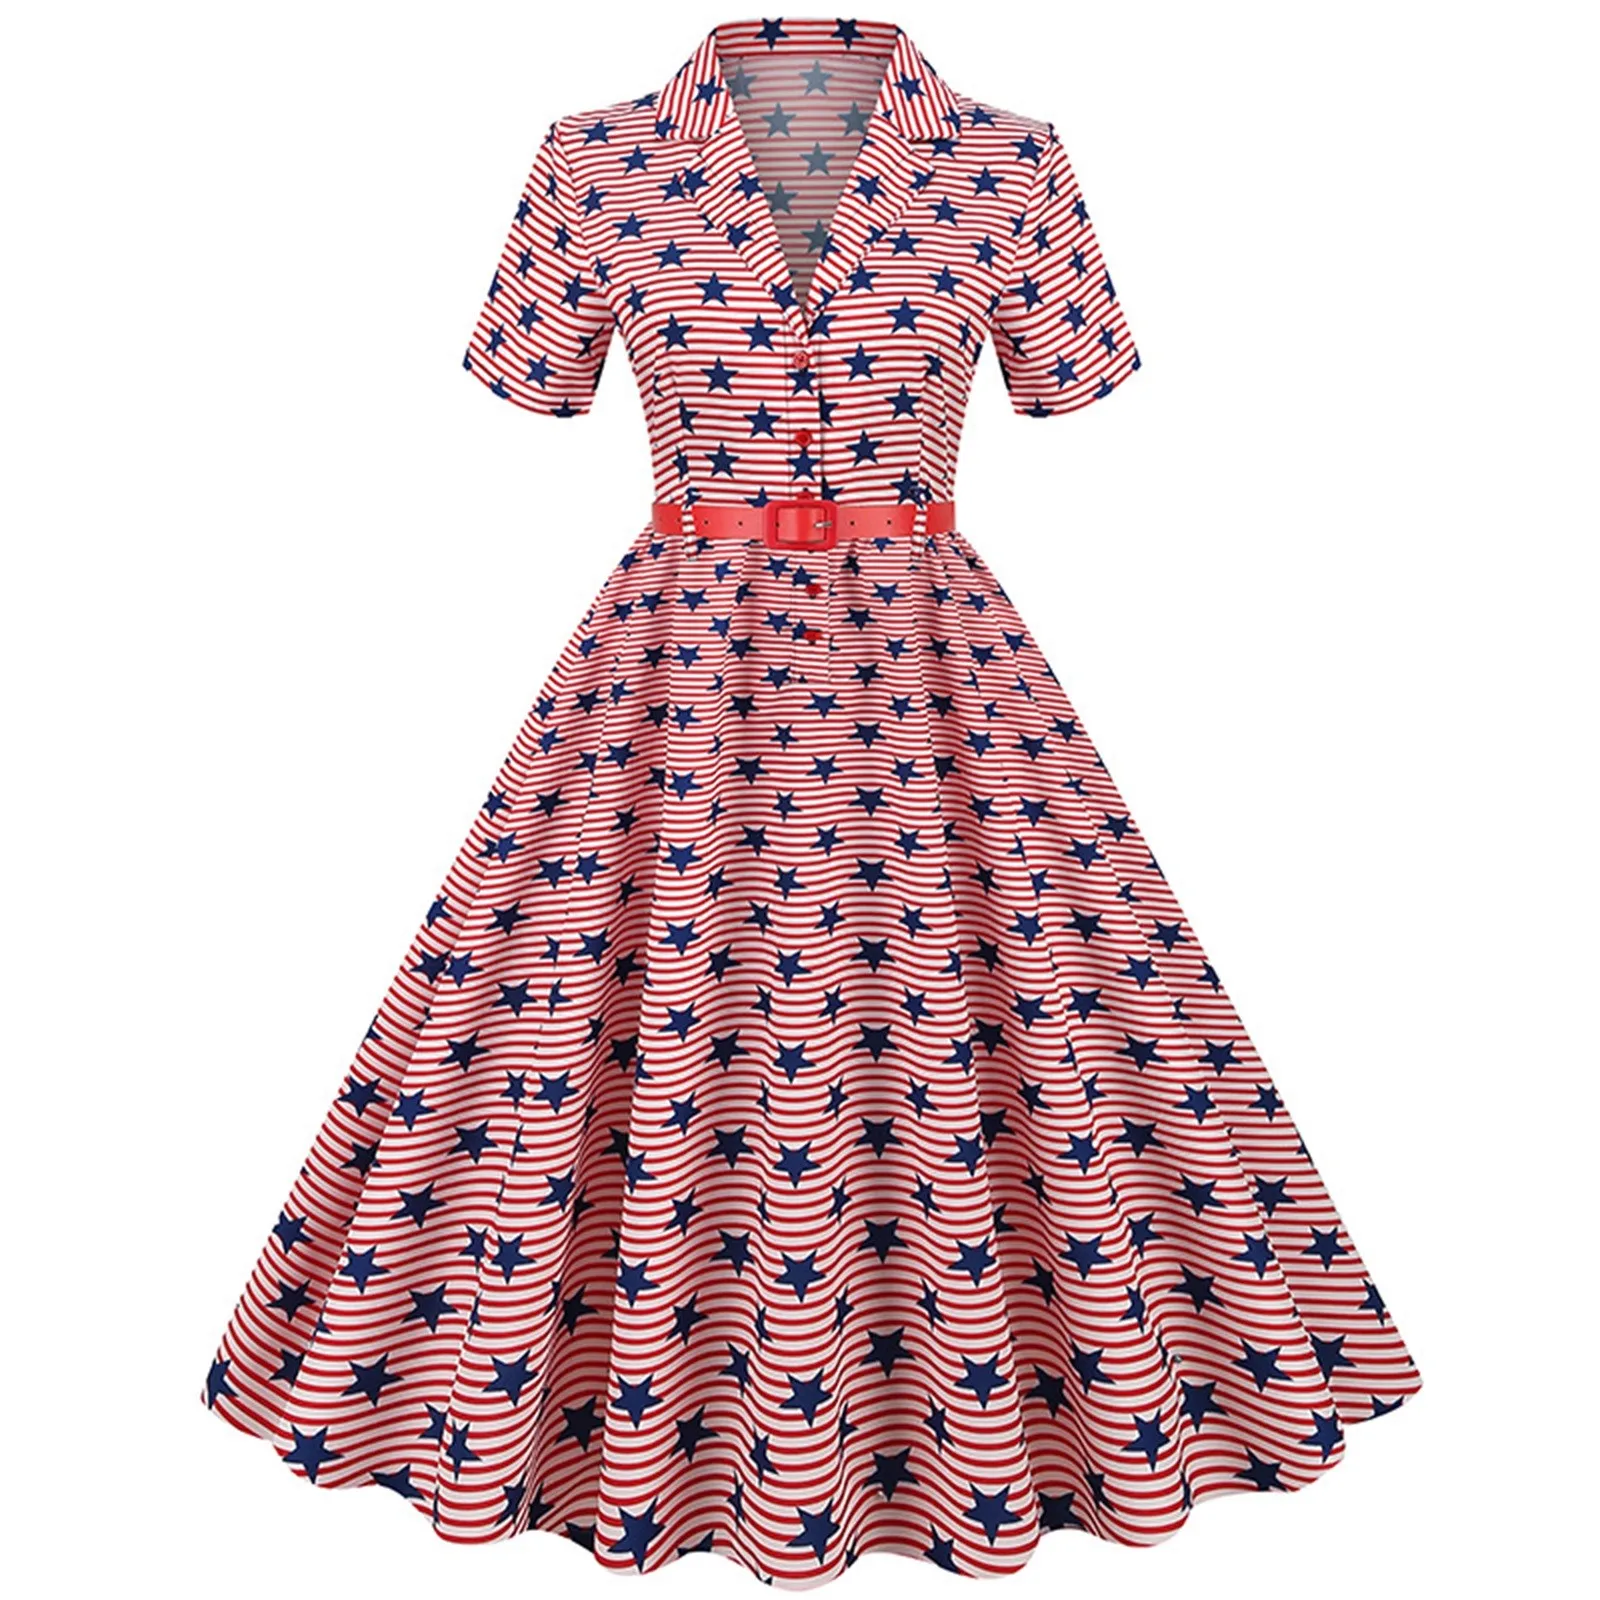 

Women Retro 1950s Independence Day Print Casual Pleat Dress Summer Short Sleeve Button Belt Flag Print Party Prom Swing Vestidos